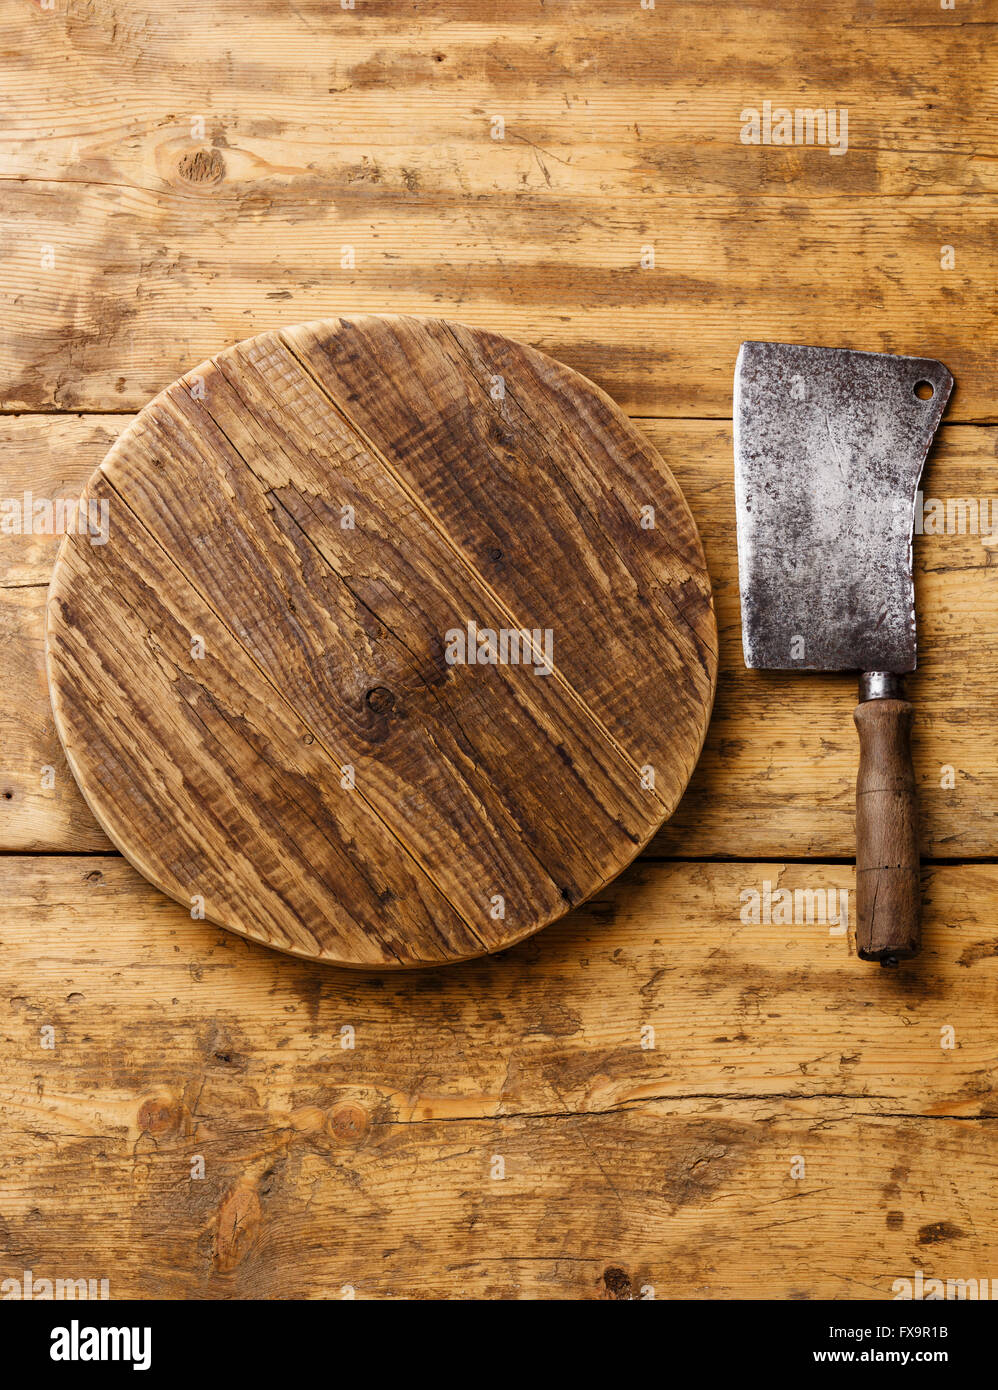 Butcher Meat cleaver and Chopping board block on wooden background Stock Photo